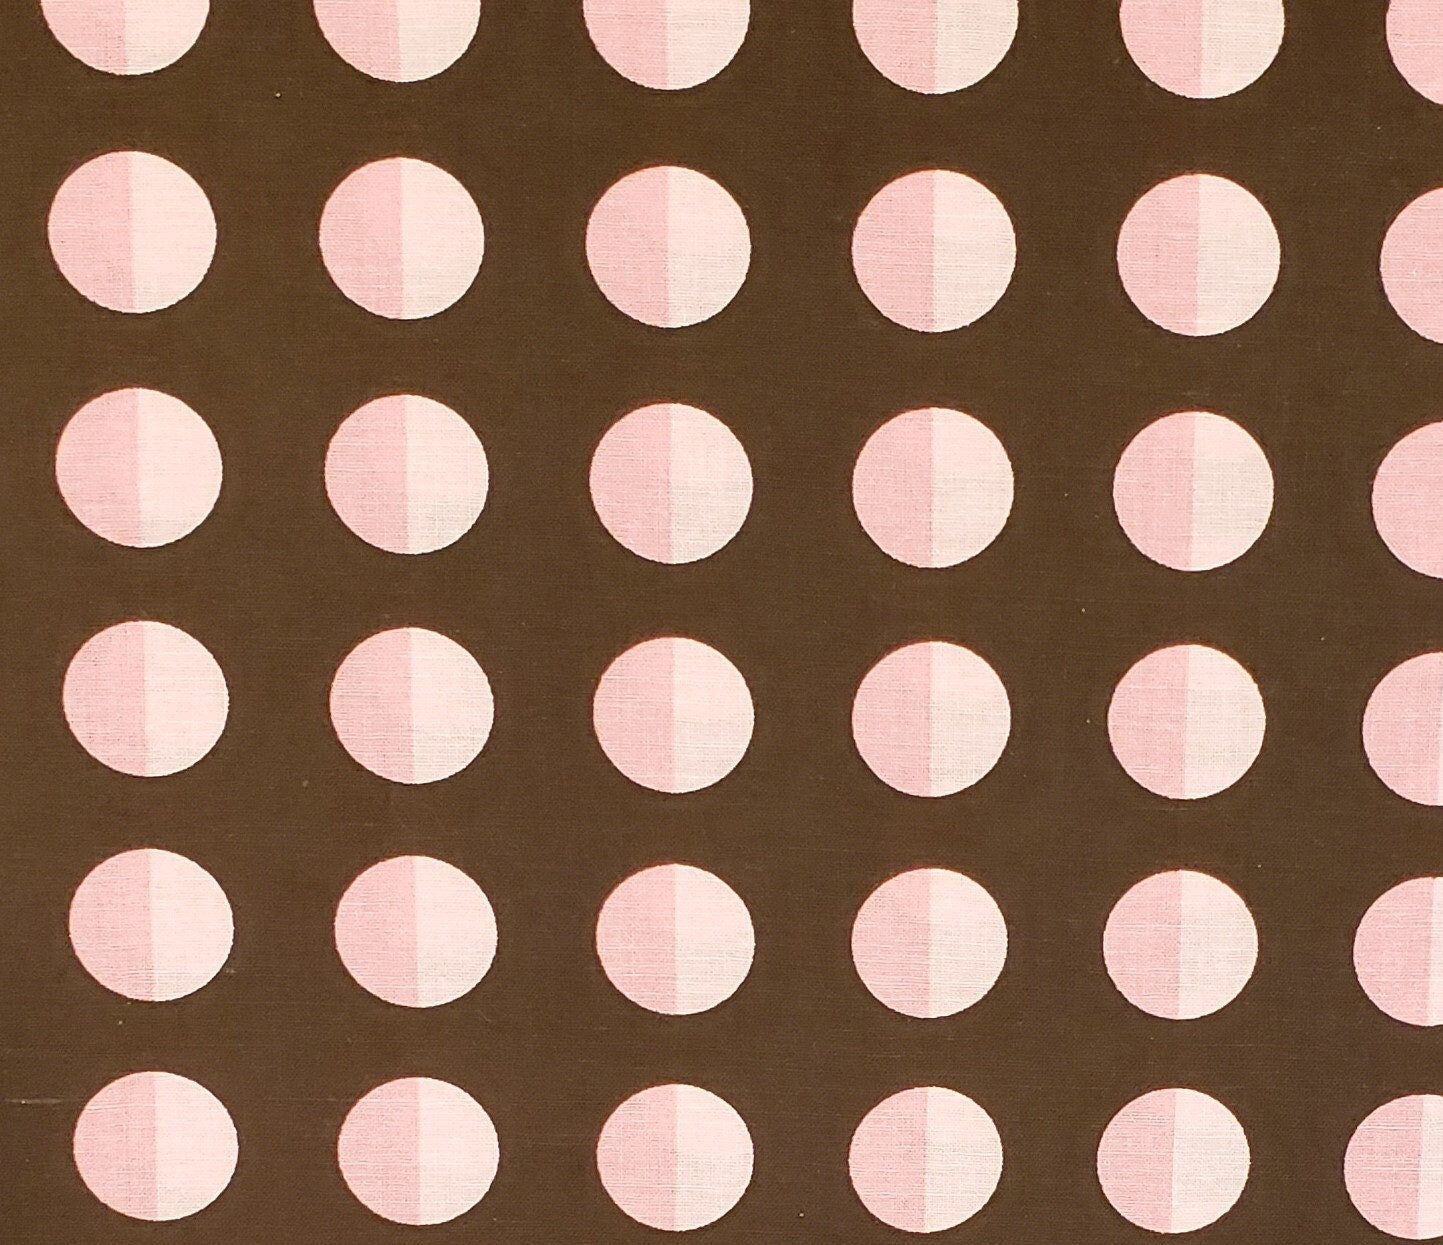 Designed and Produced Exclusively for JoAnn Fabric and Craft Stores - Dark Brown Fabric with Light and Dark Pink Dots